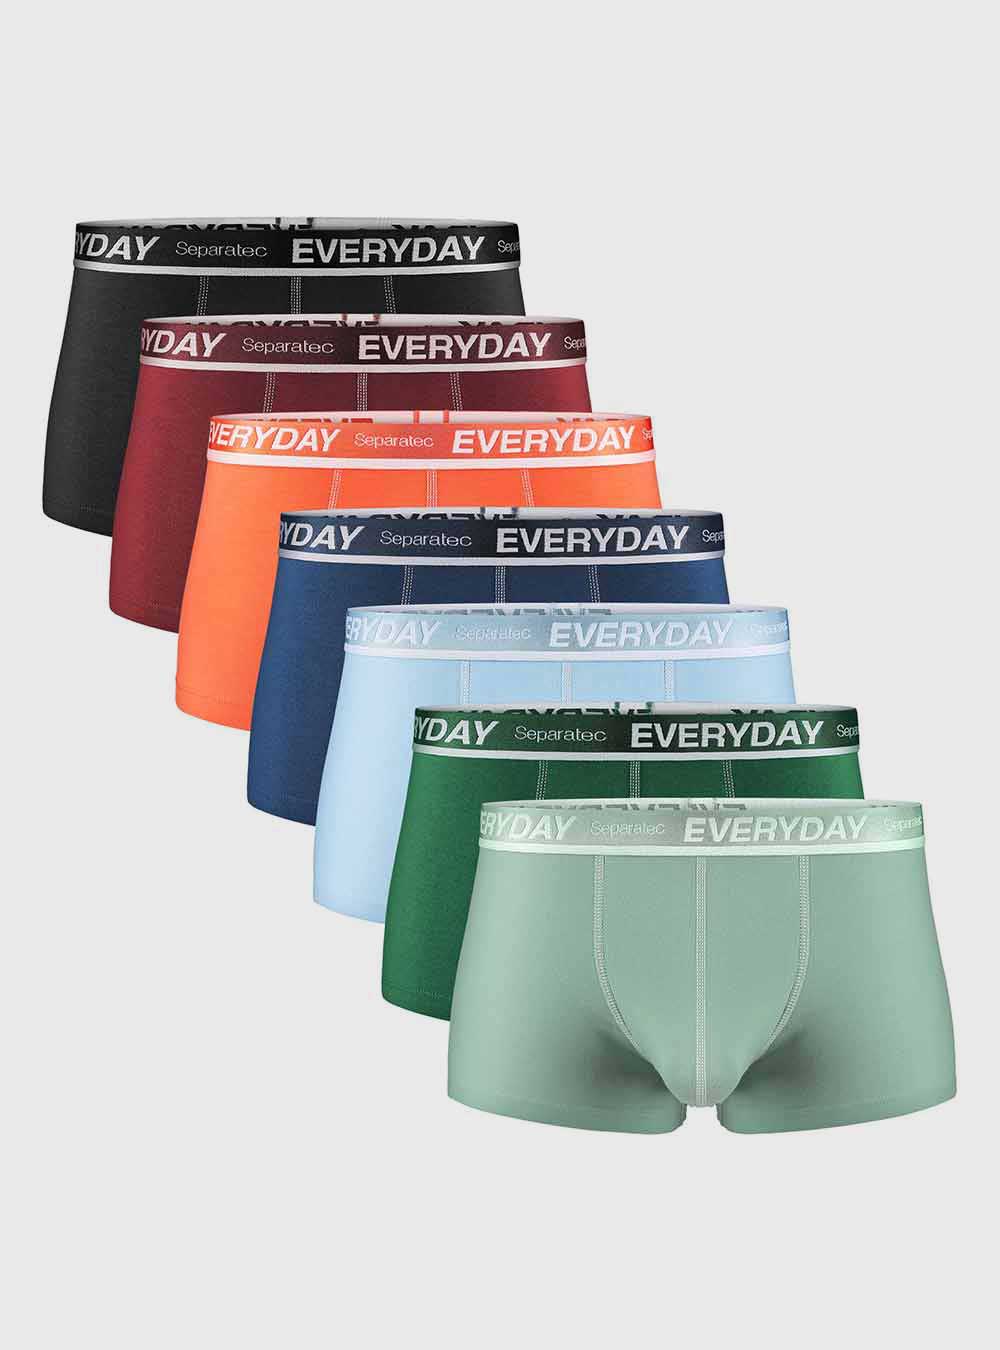 Separatec Colorful Everyday Cotton Trunks